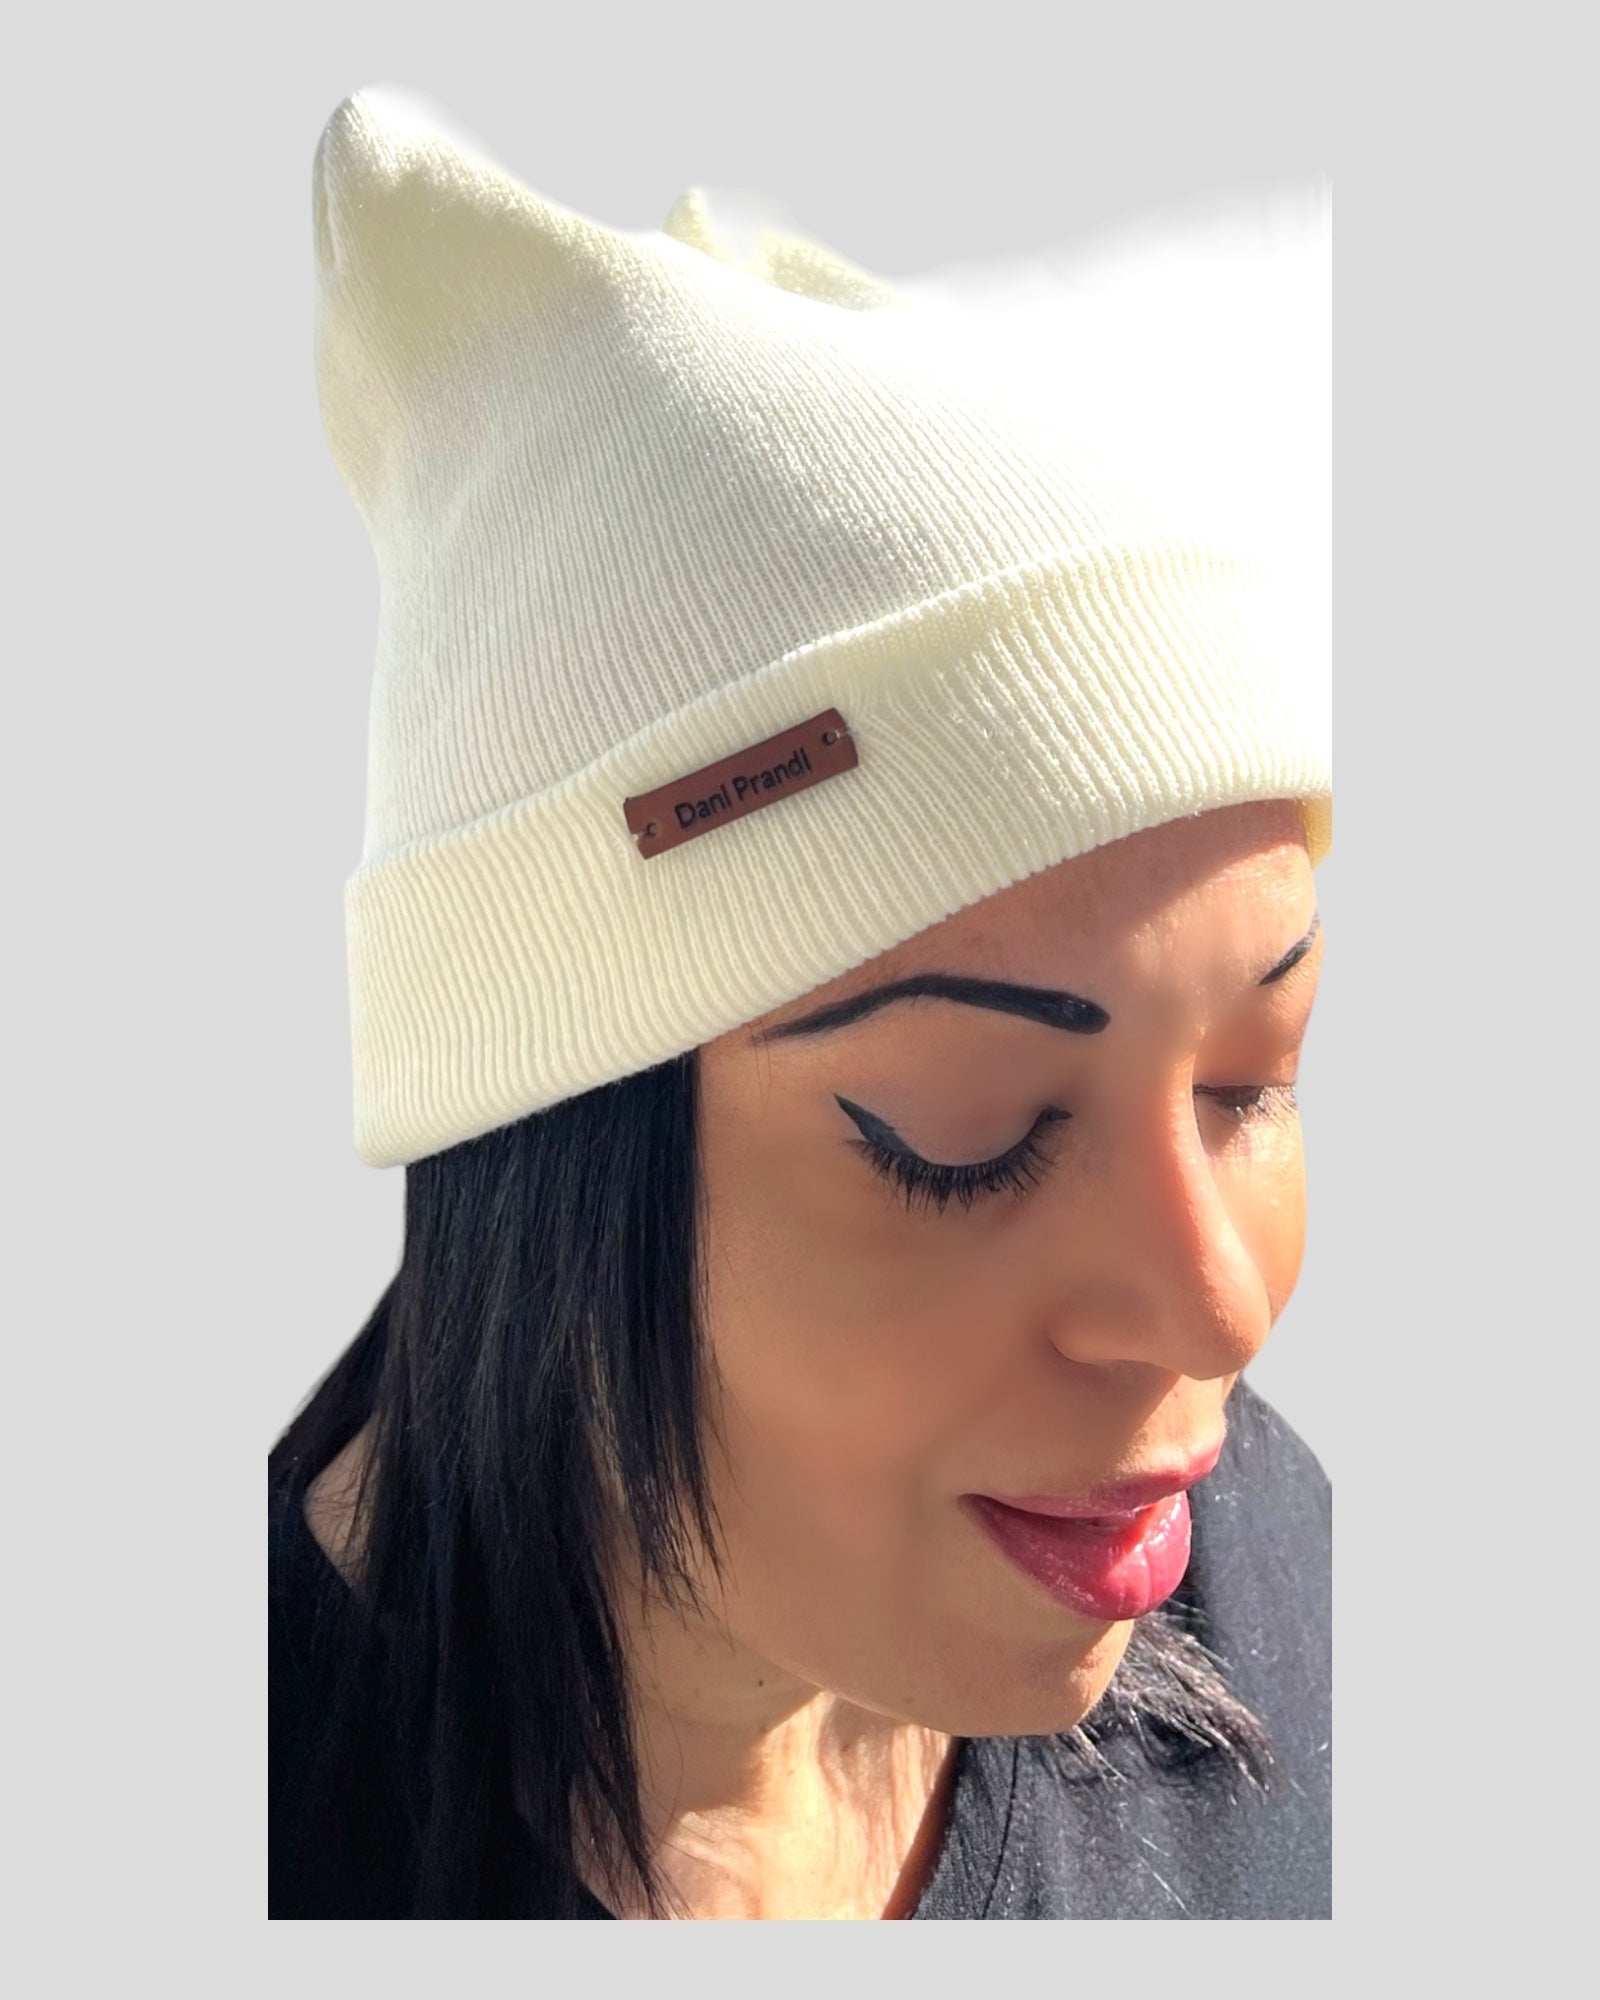 Beanie Hat with Cat Ears, adding playful feline flair to your look. Crafted from comfortable acrylic material, this hat is designed for warmth and style. The cat ears offer a whimsical touch, making it a unique and fashionable accessory.